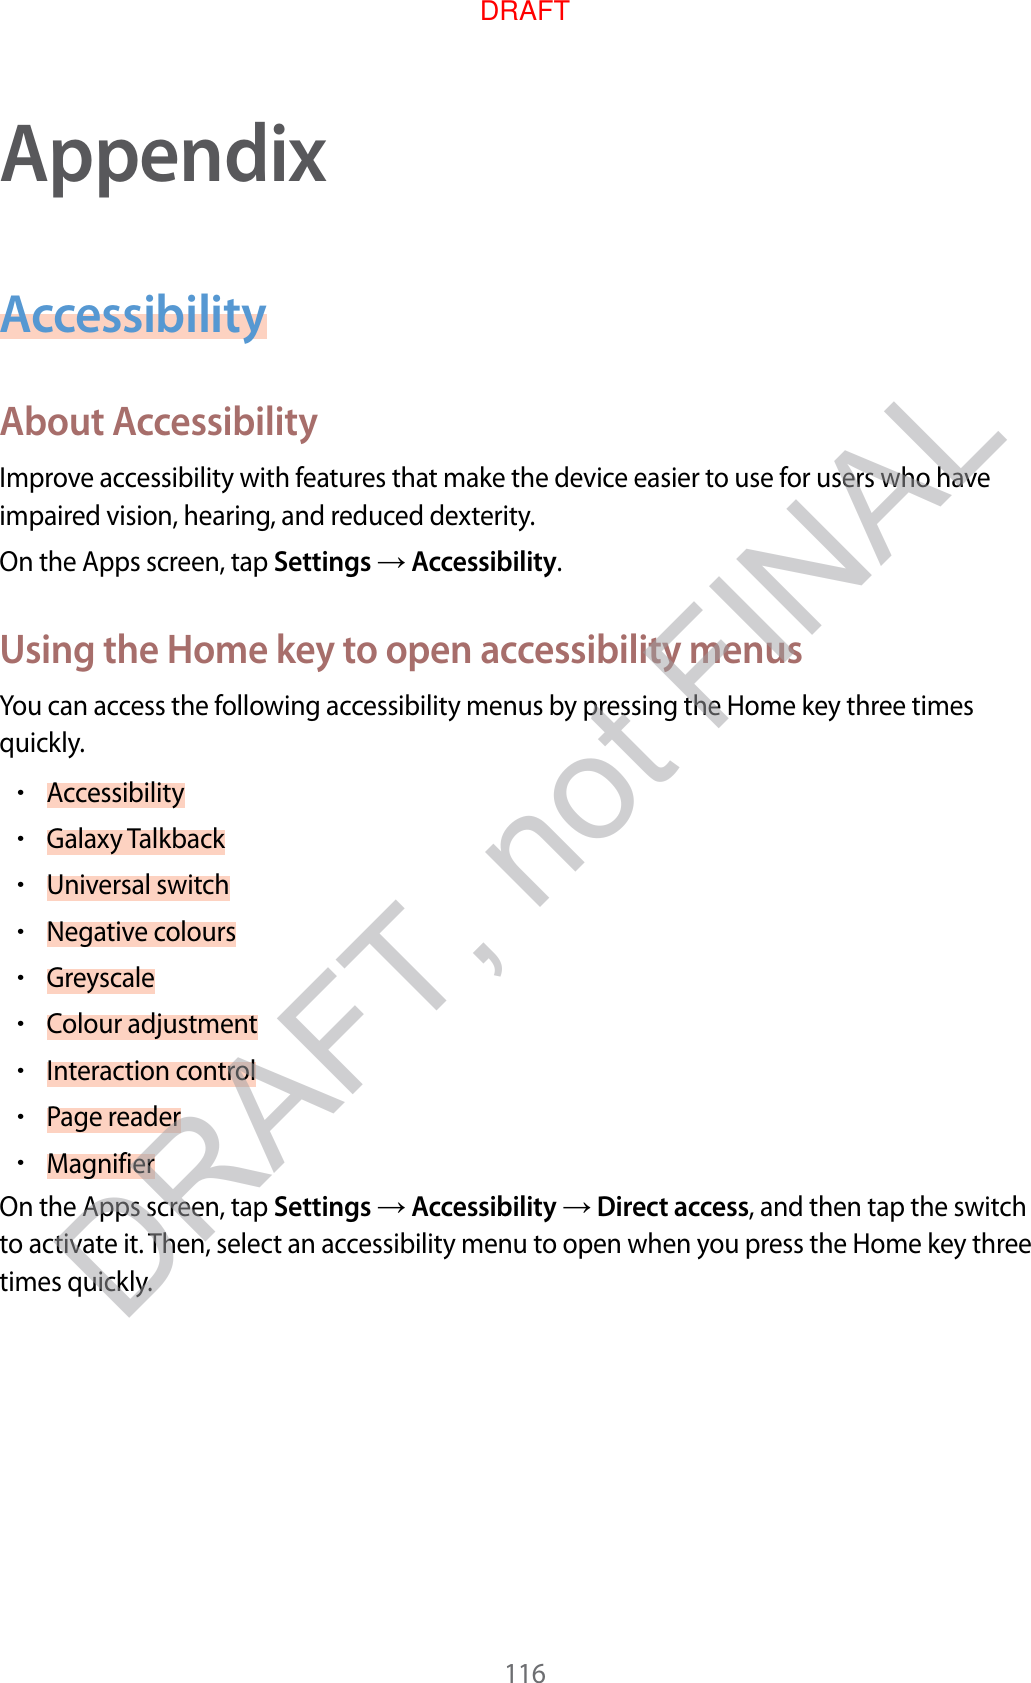 116AppendixAccessibilityAbout A c c essibilityImprove ac c essibility with featur es tha t make the device easier t o use f or users who ha v e impaired vision, hearing , and r educed de xterity.On the Apps screen, tap Settings  Accessibility.Using the Home k ey t o open ac c essibility menusYou can access the follo wing acc essibility menus by pr essing the Home key thr ee times quickly.•Accessibility•Galaxy T alkback•Universal switch•Negative c olours•Greyscale•Colour adjustment•Interaction control•P age r eader•MagnifierOn the Apps screen, tap Settings  Accessibility  Direct access, and then tap the switch to activate it. T hen, select an accessibility menu to open when you pr ess the Home key thr ee times quickly .DRAFT, not FINALDRAFT